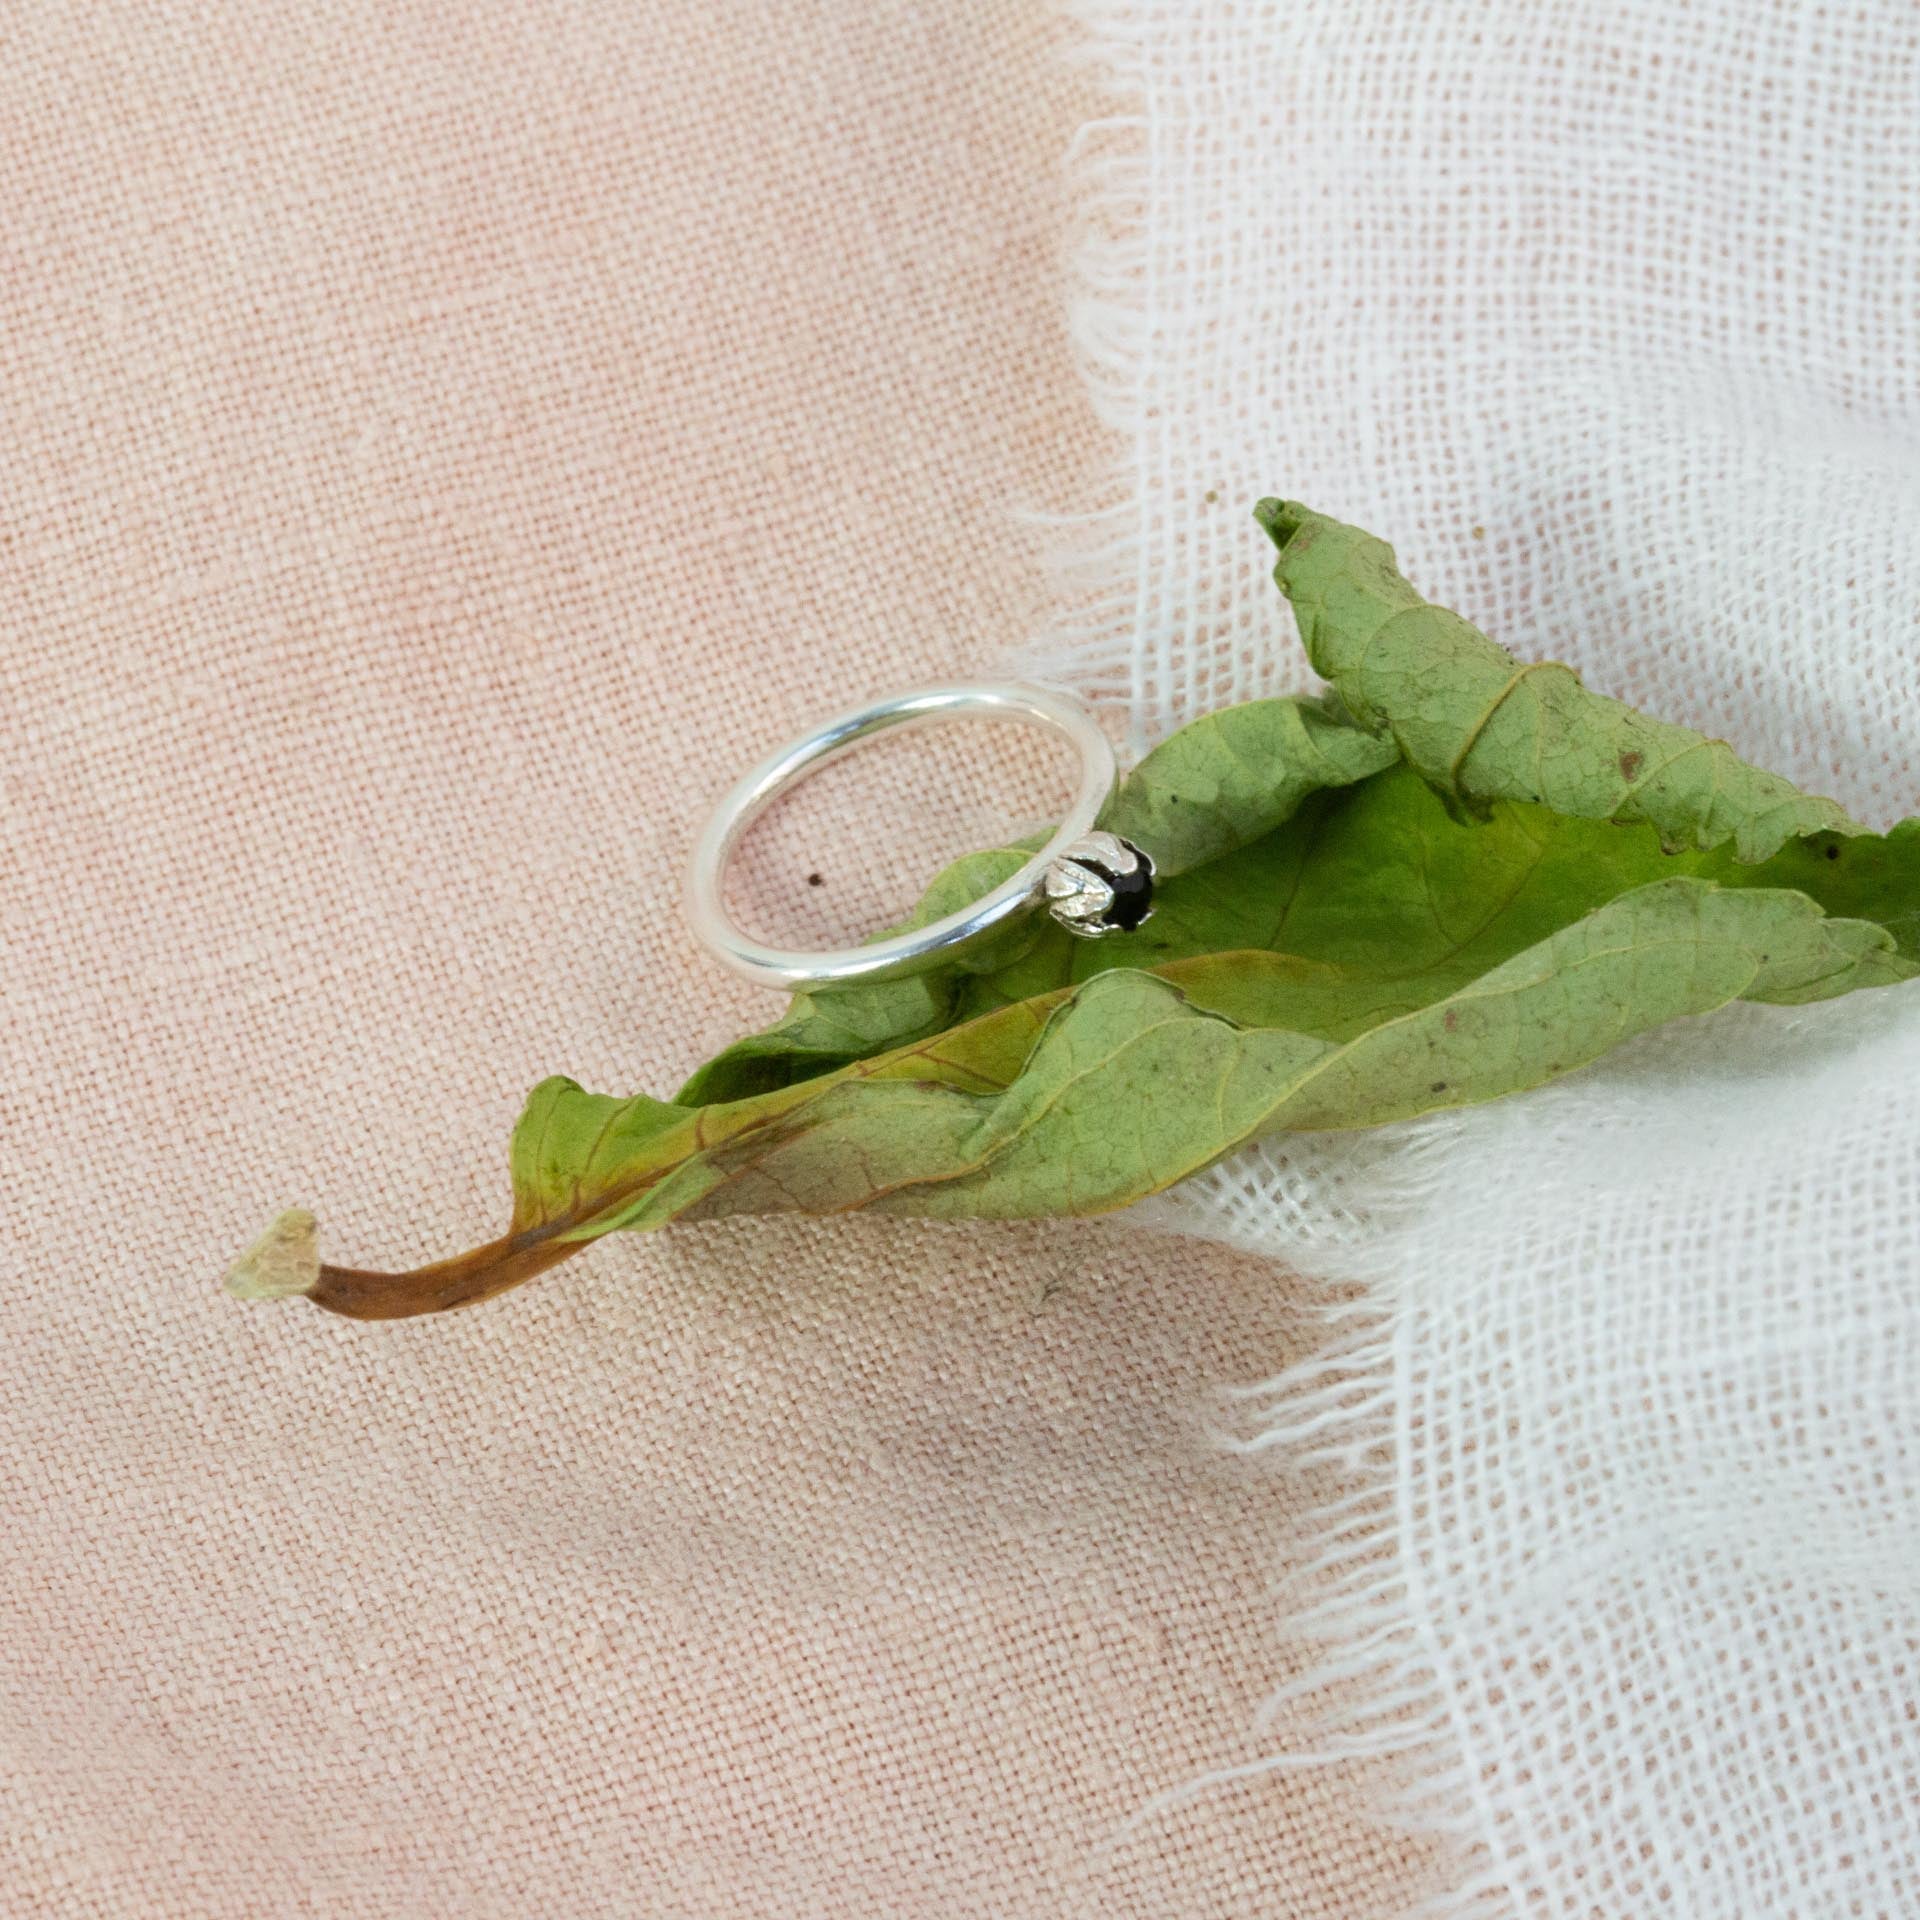 Silver engagement ring rested on green leave above pink and white cloth 